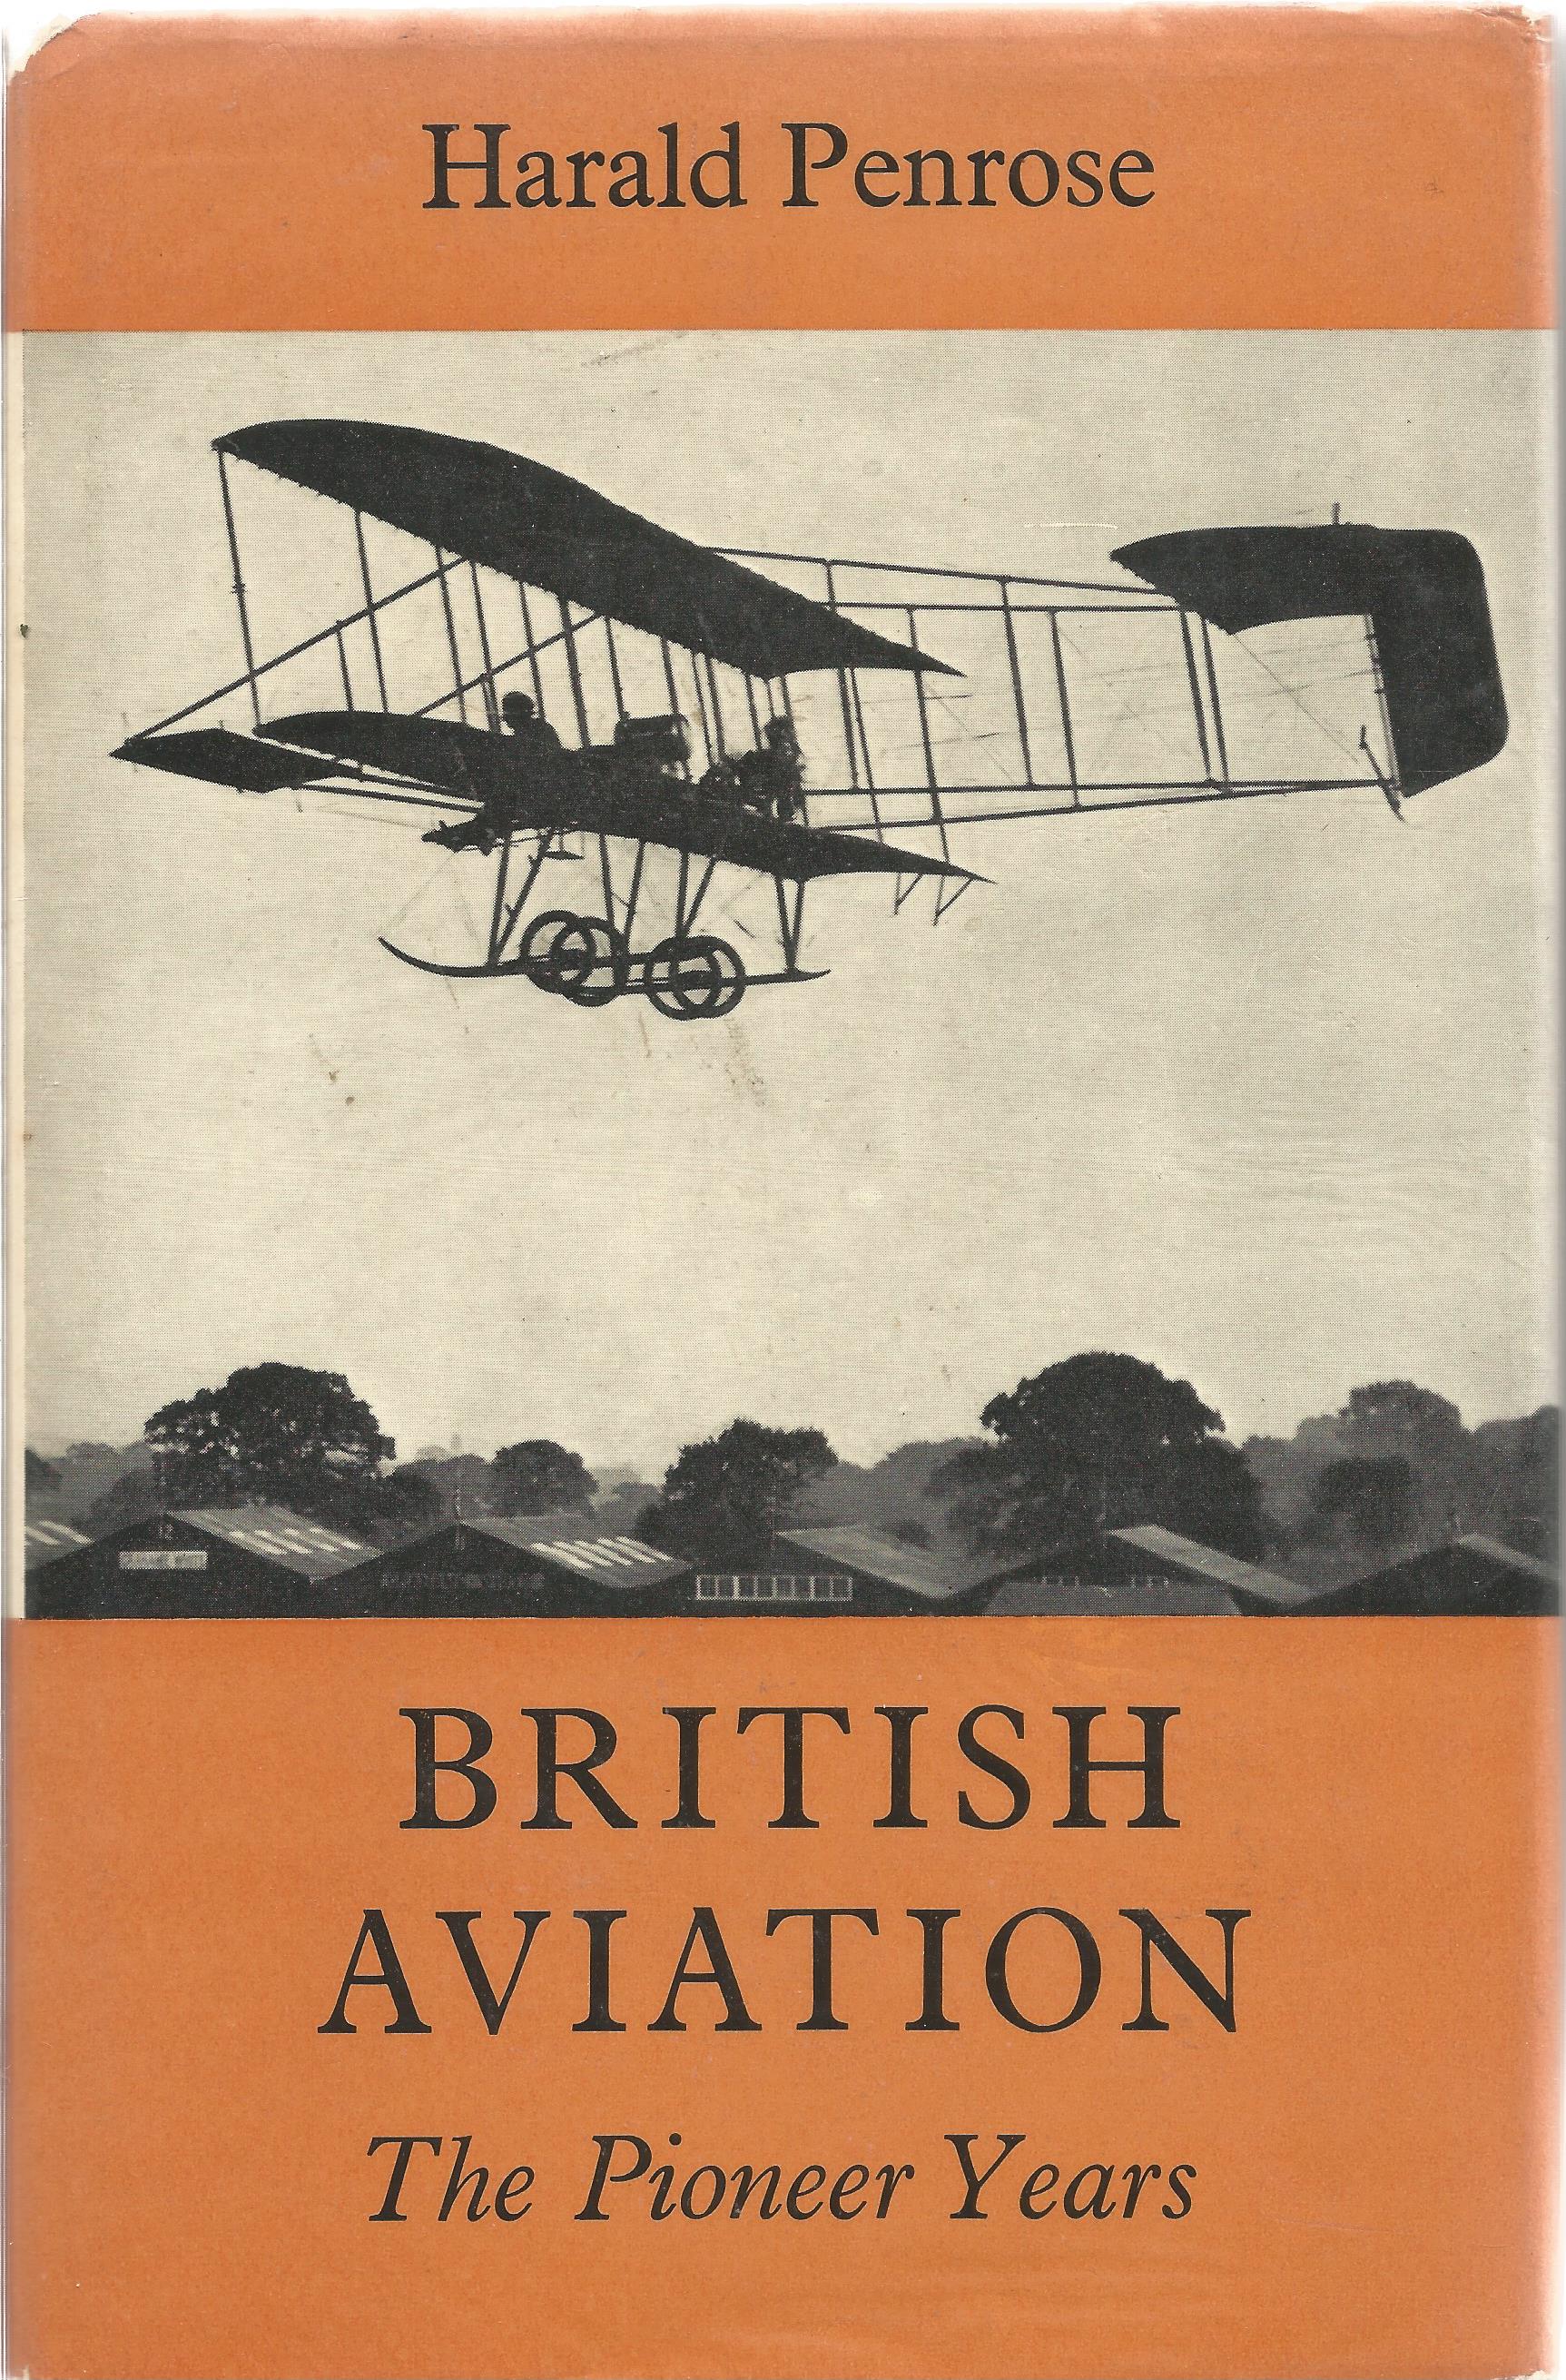 Harald Penrose. British Aviation - The pioneer years. A First Edition Signed hardback book. Signed